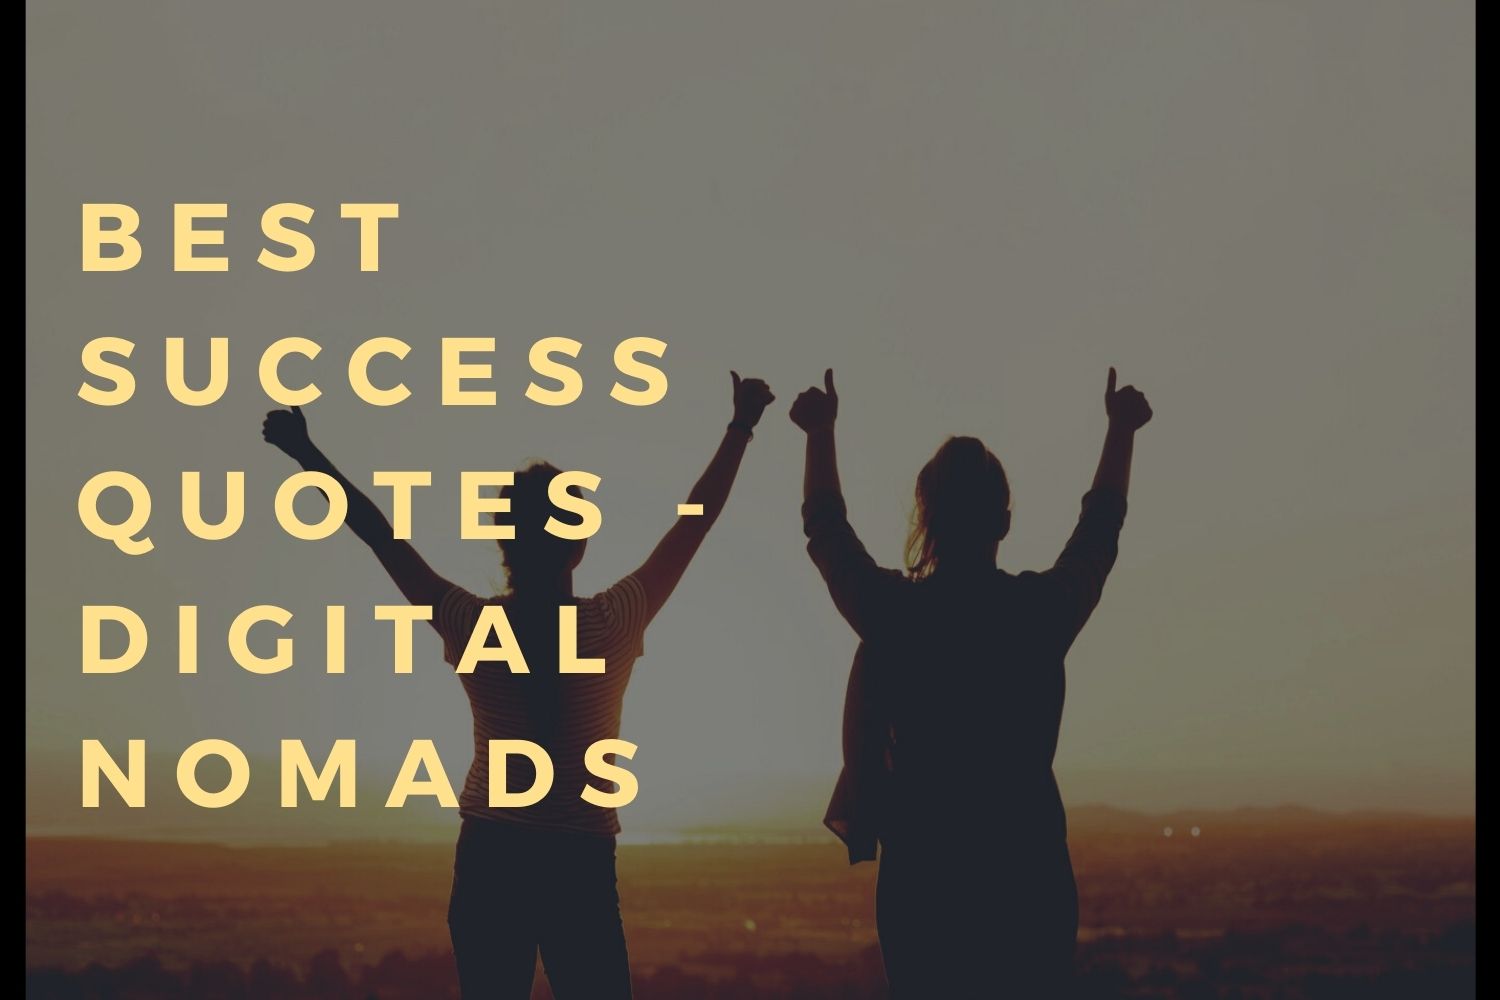 Best Success Quotes for Digital Nomads